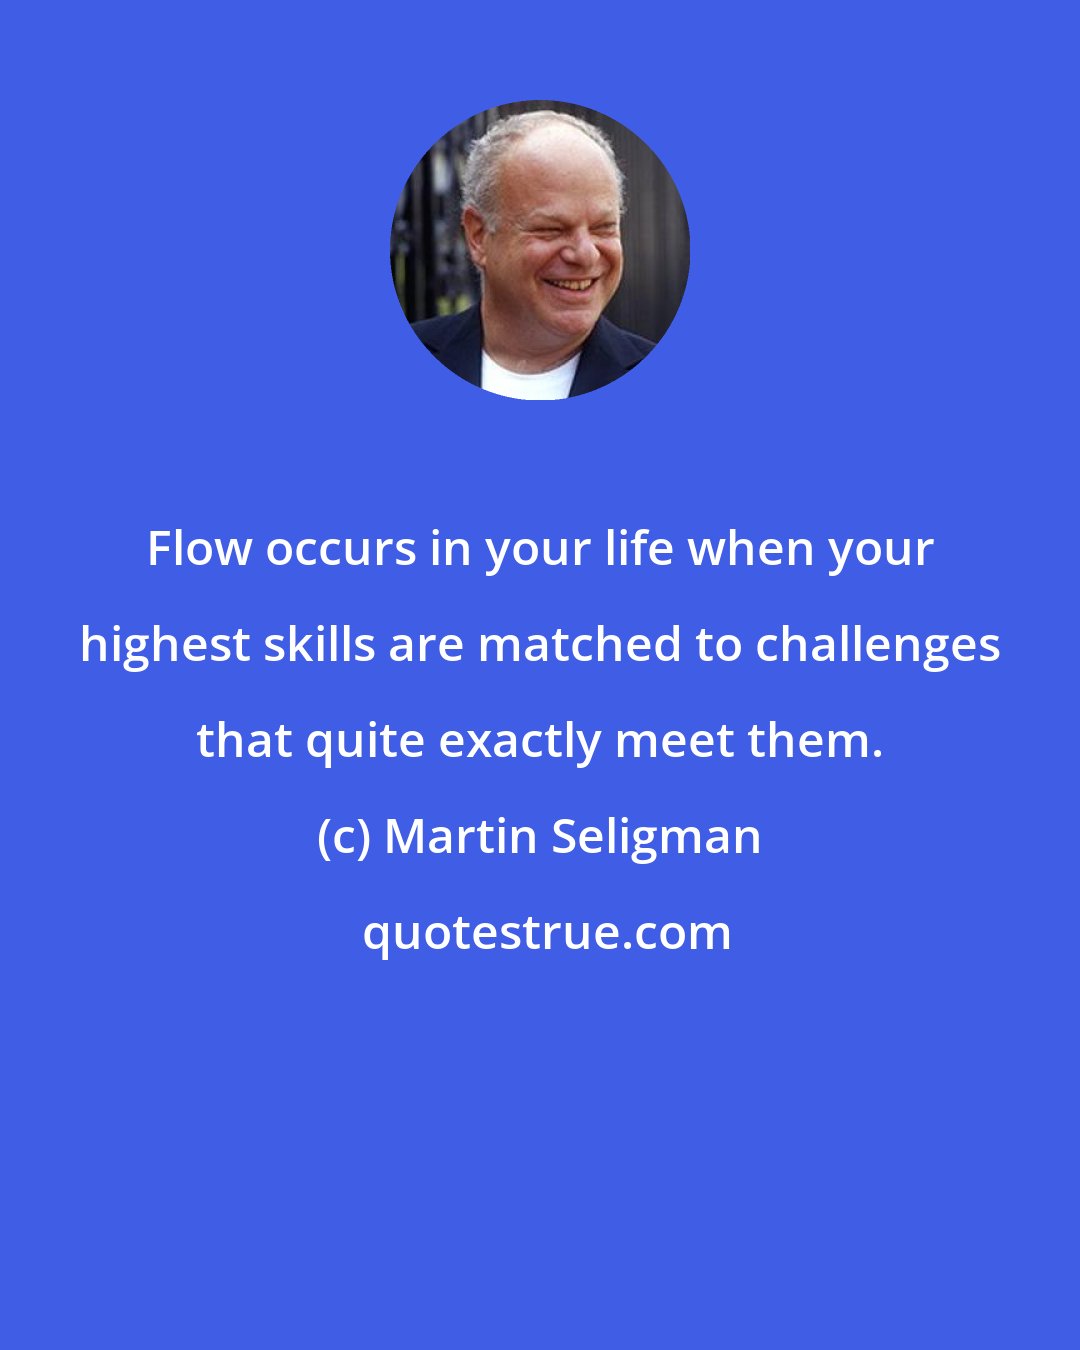 Martin Seligman: Flow occurs in your life when your highest skills are matched to challenges that quite exactly meet them.